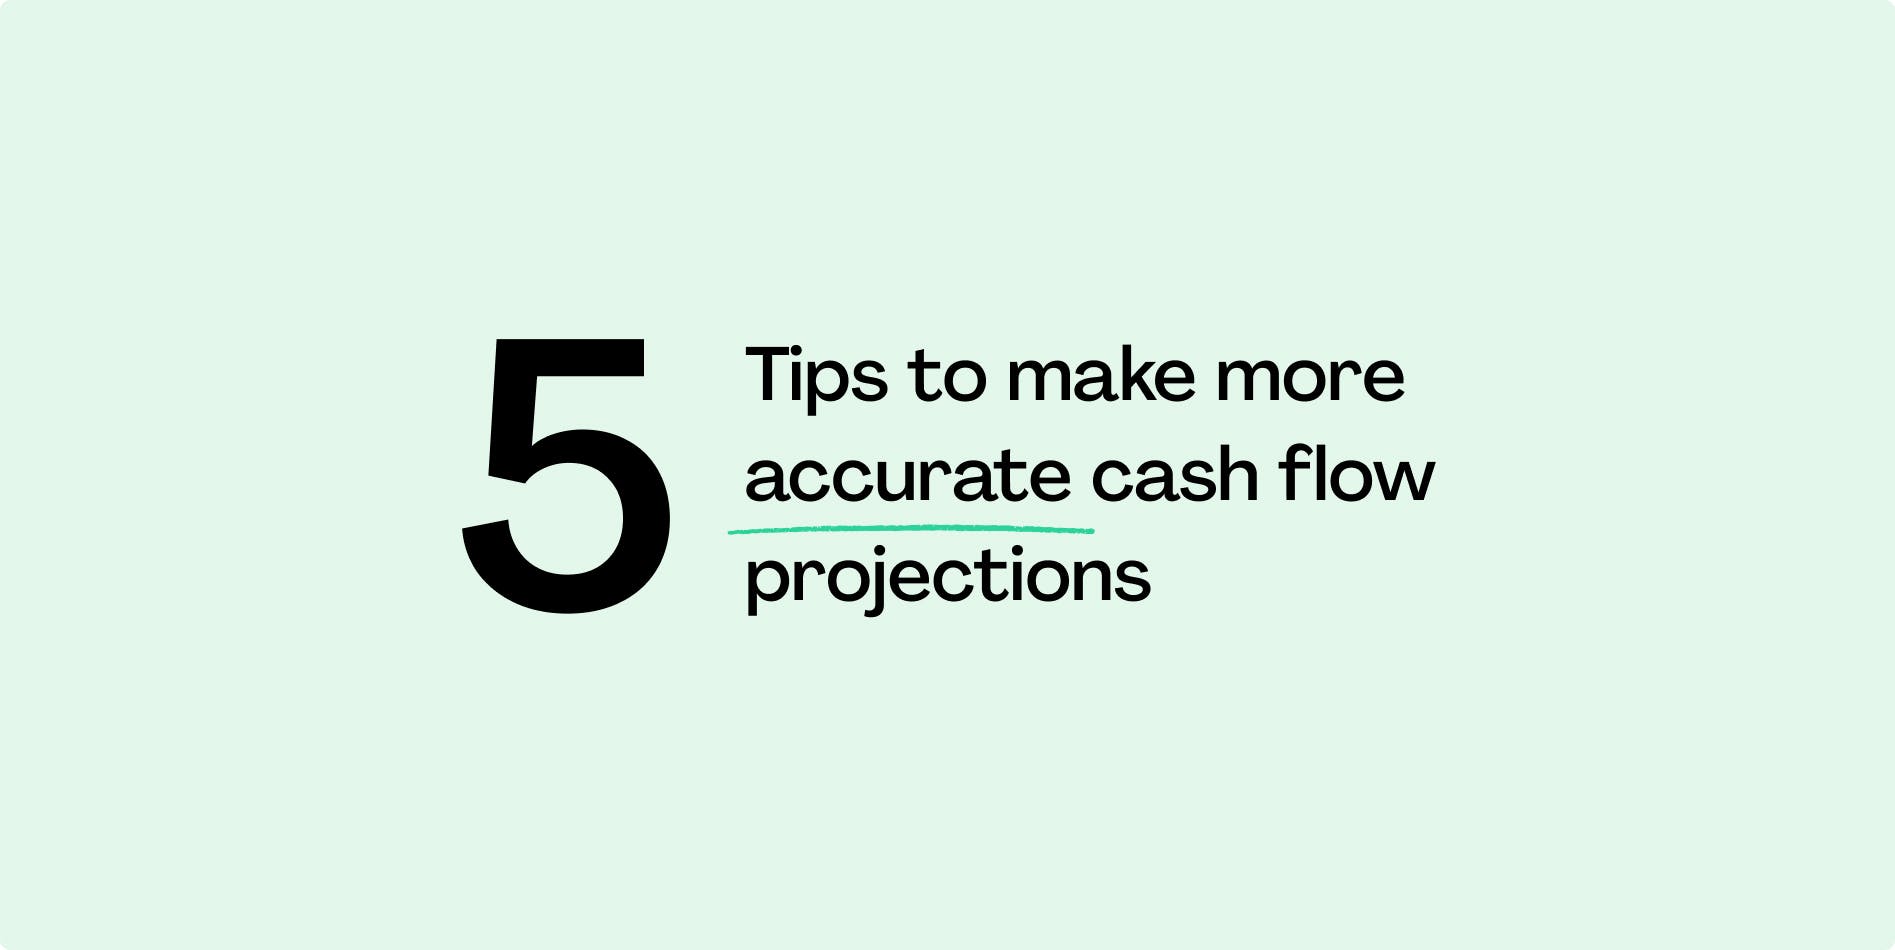 5 tips for more accurate cashflow projections